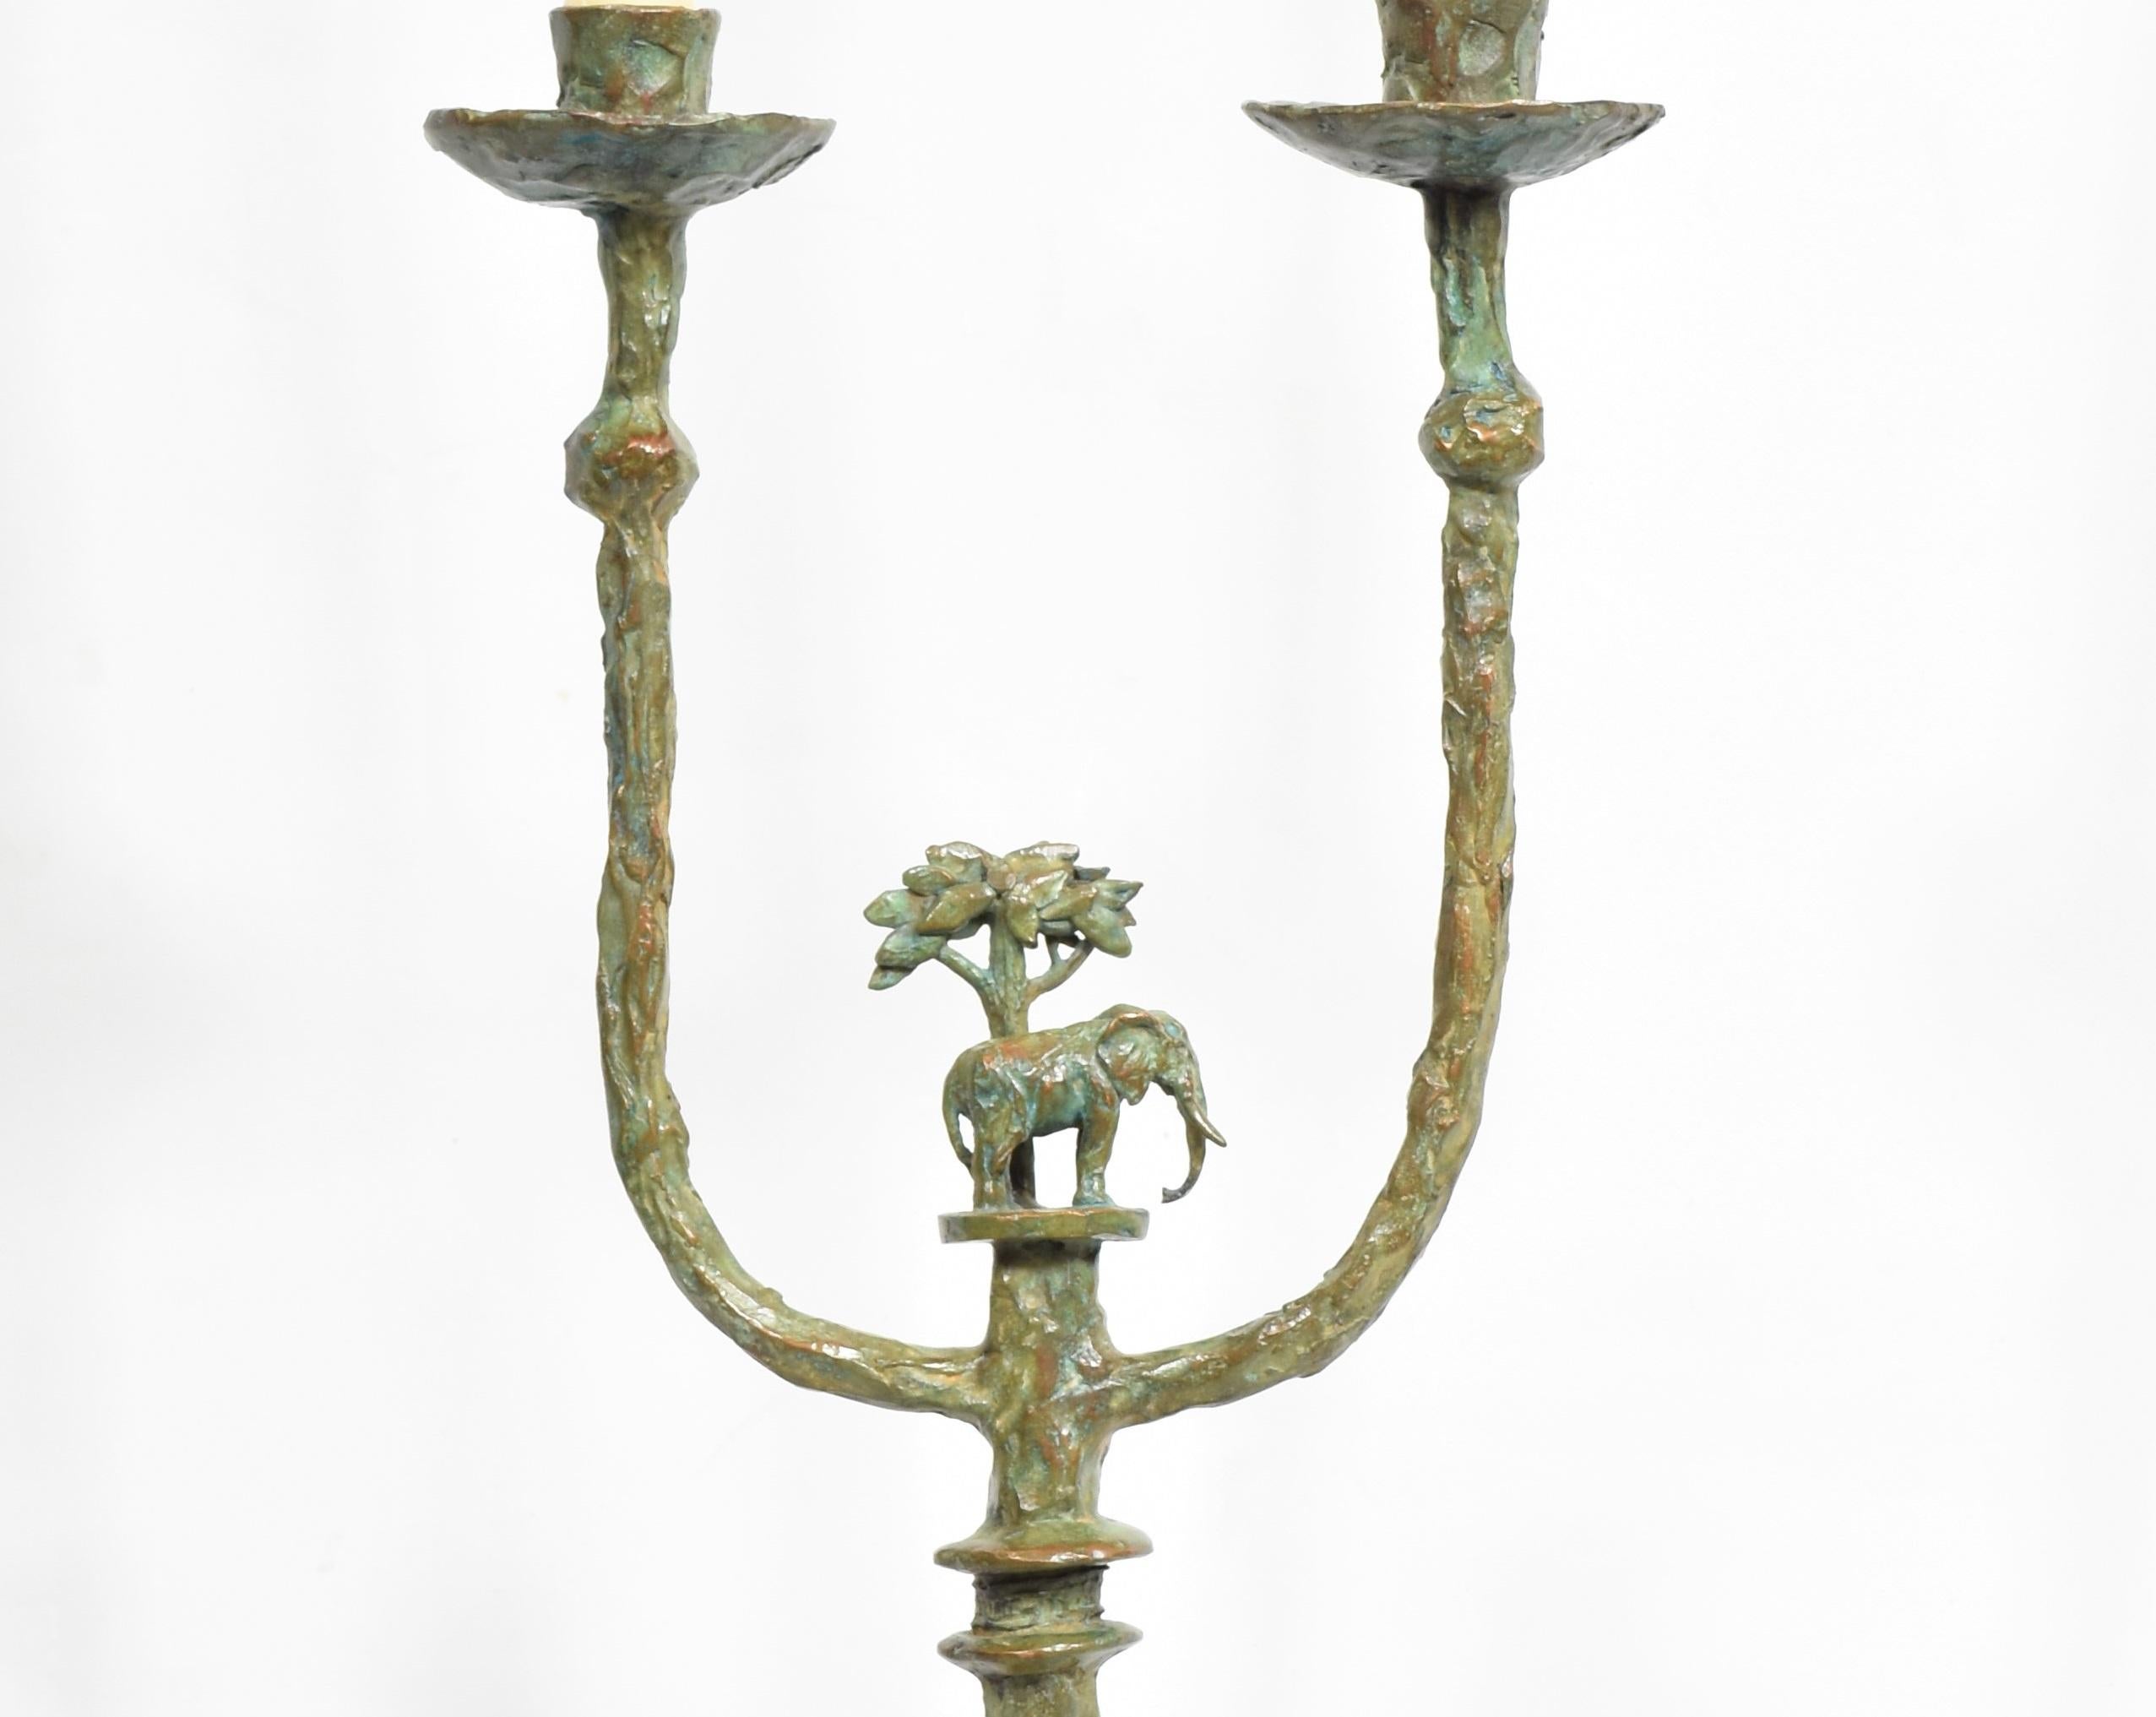 Unique and handmade functional art in cast bronze. Bronze candlestick with elephant and acacia tree motif with Brown Verdigris patina. Each piece is individually sculpted, cast and hand finished by myself. Each piece is very similar but still